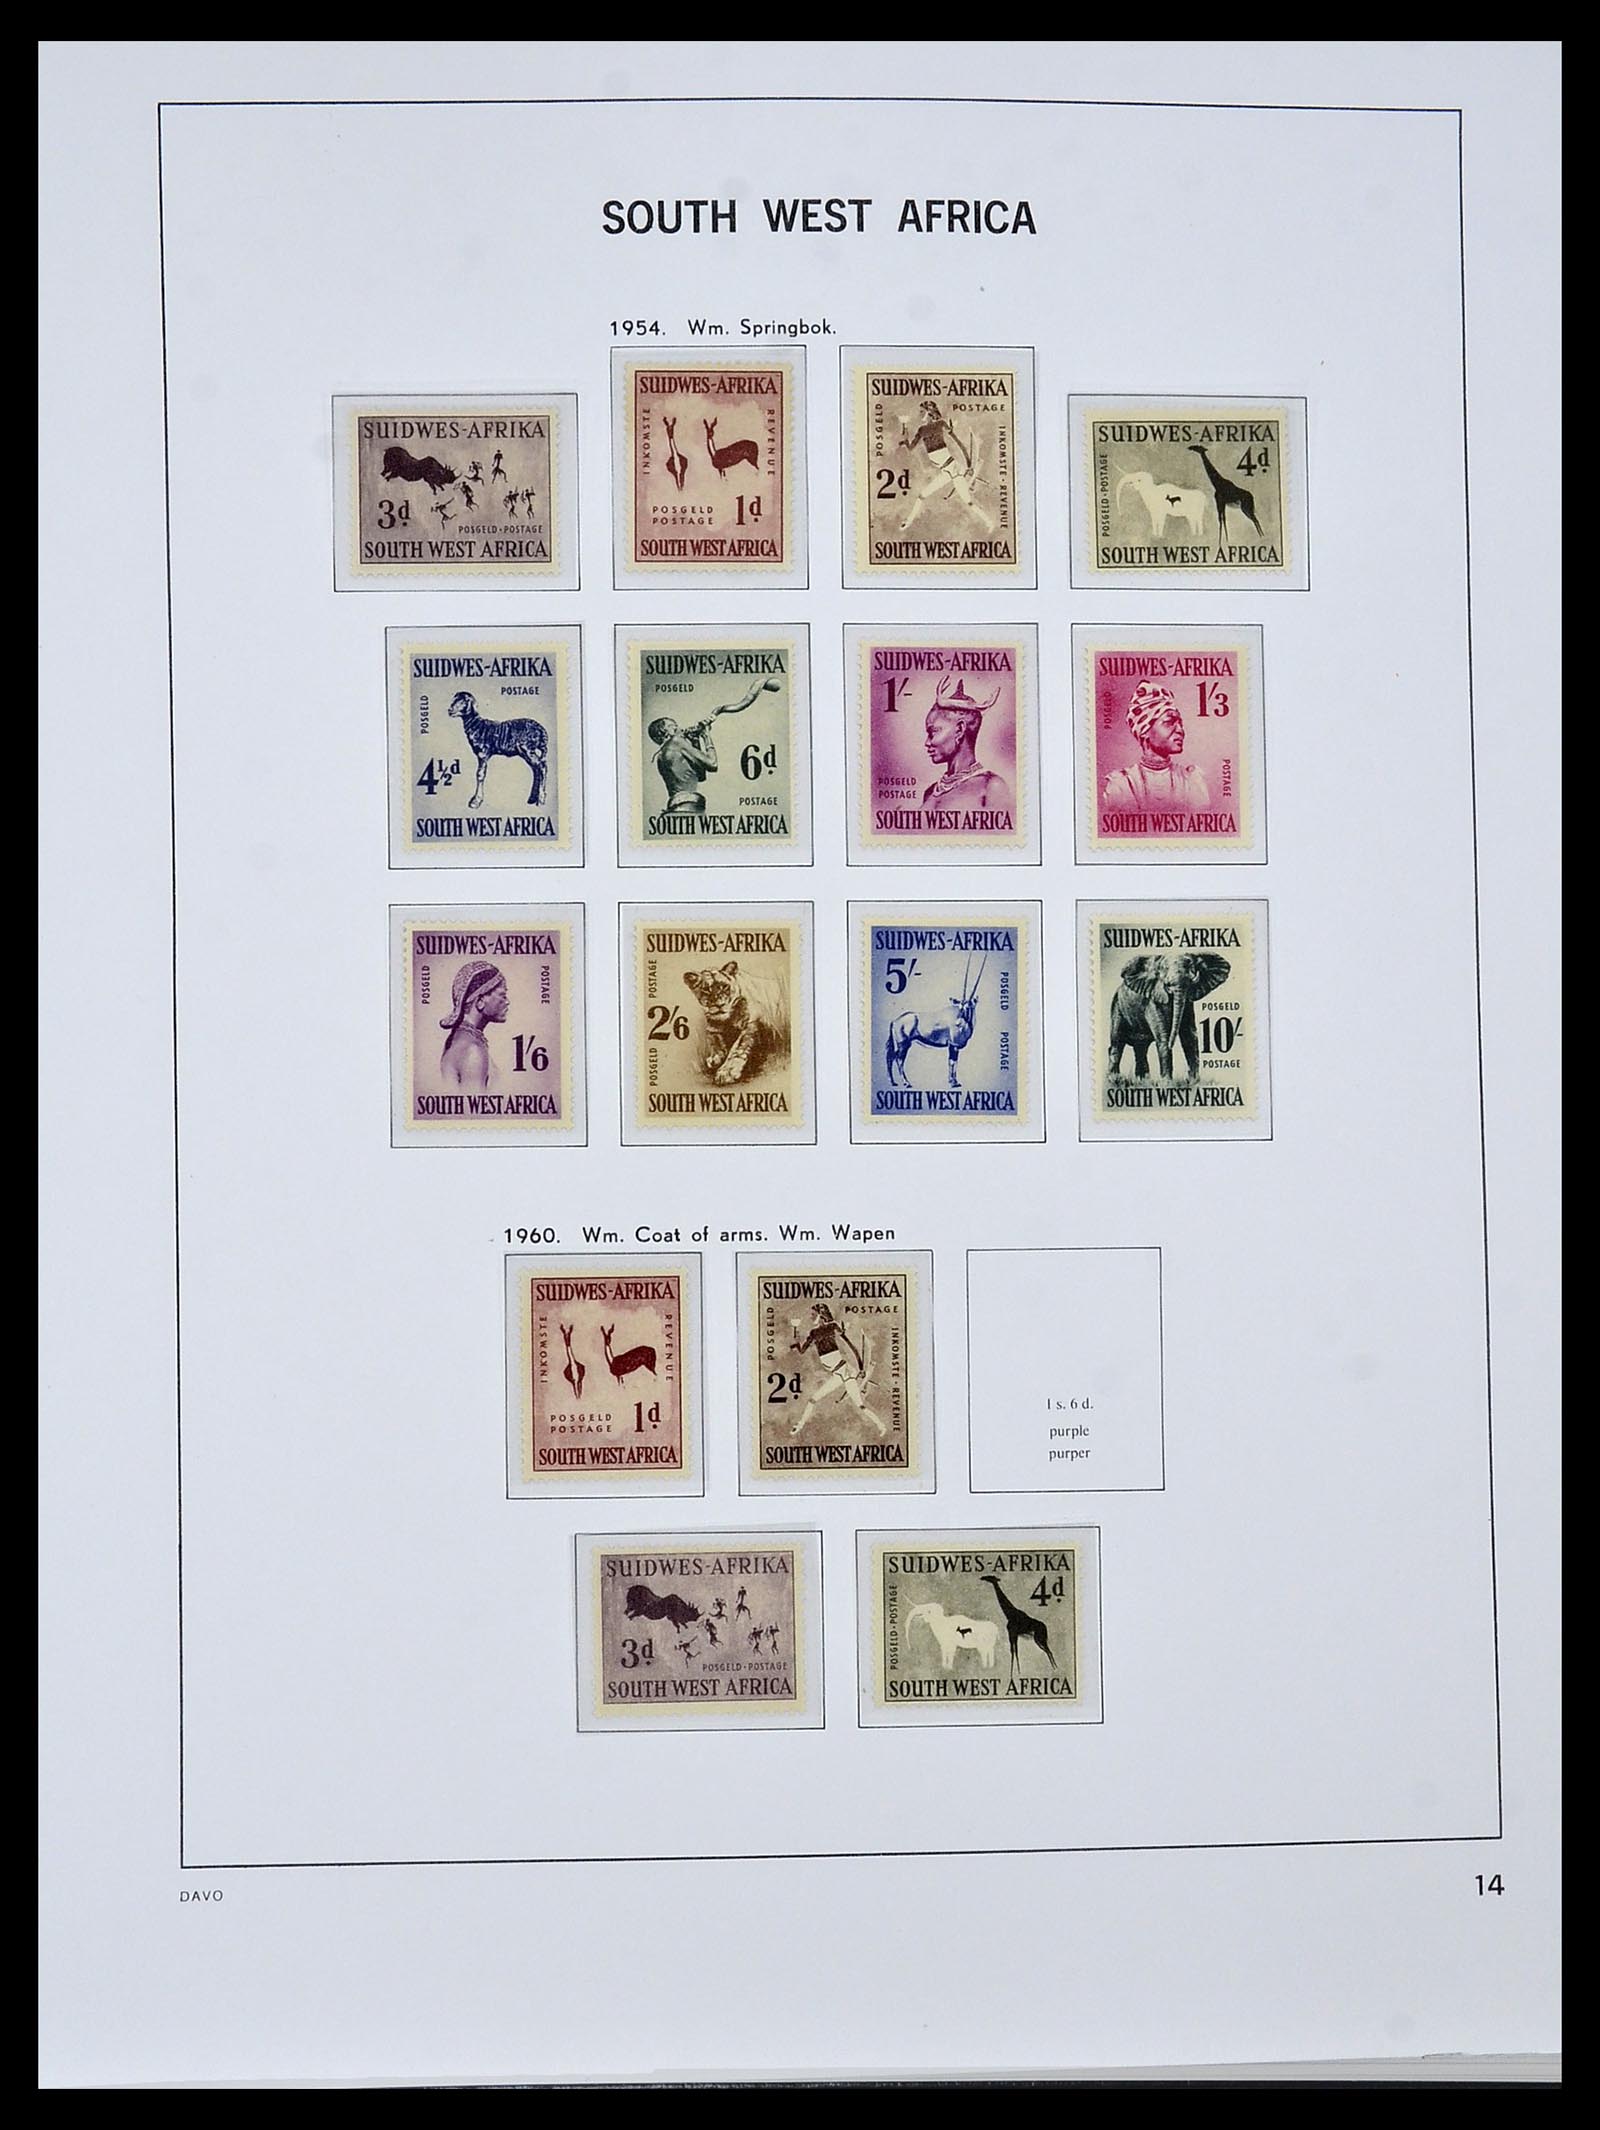 34291 009 - Stamp collection 34291 South West Africa/Namibia 1926-2017!